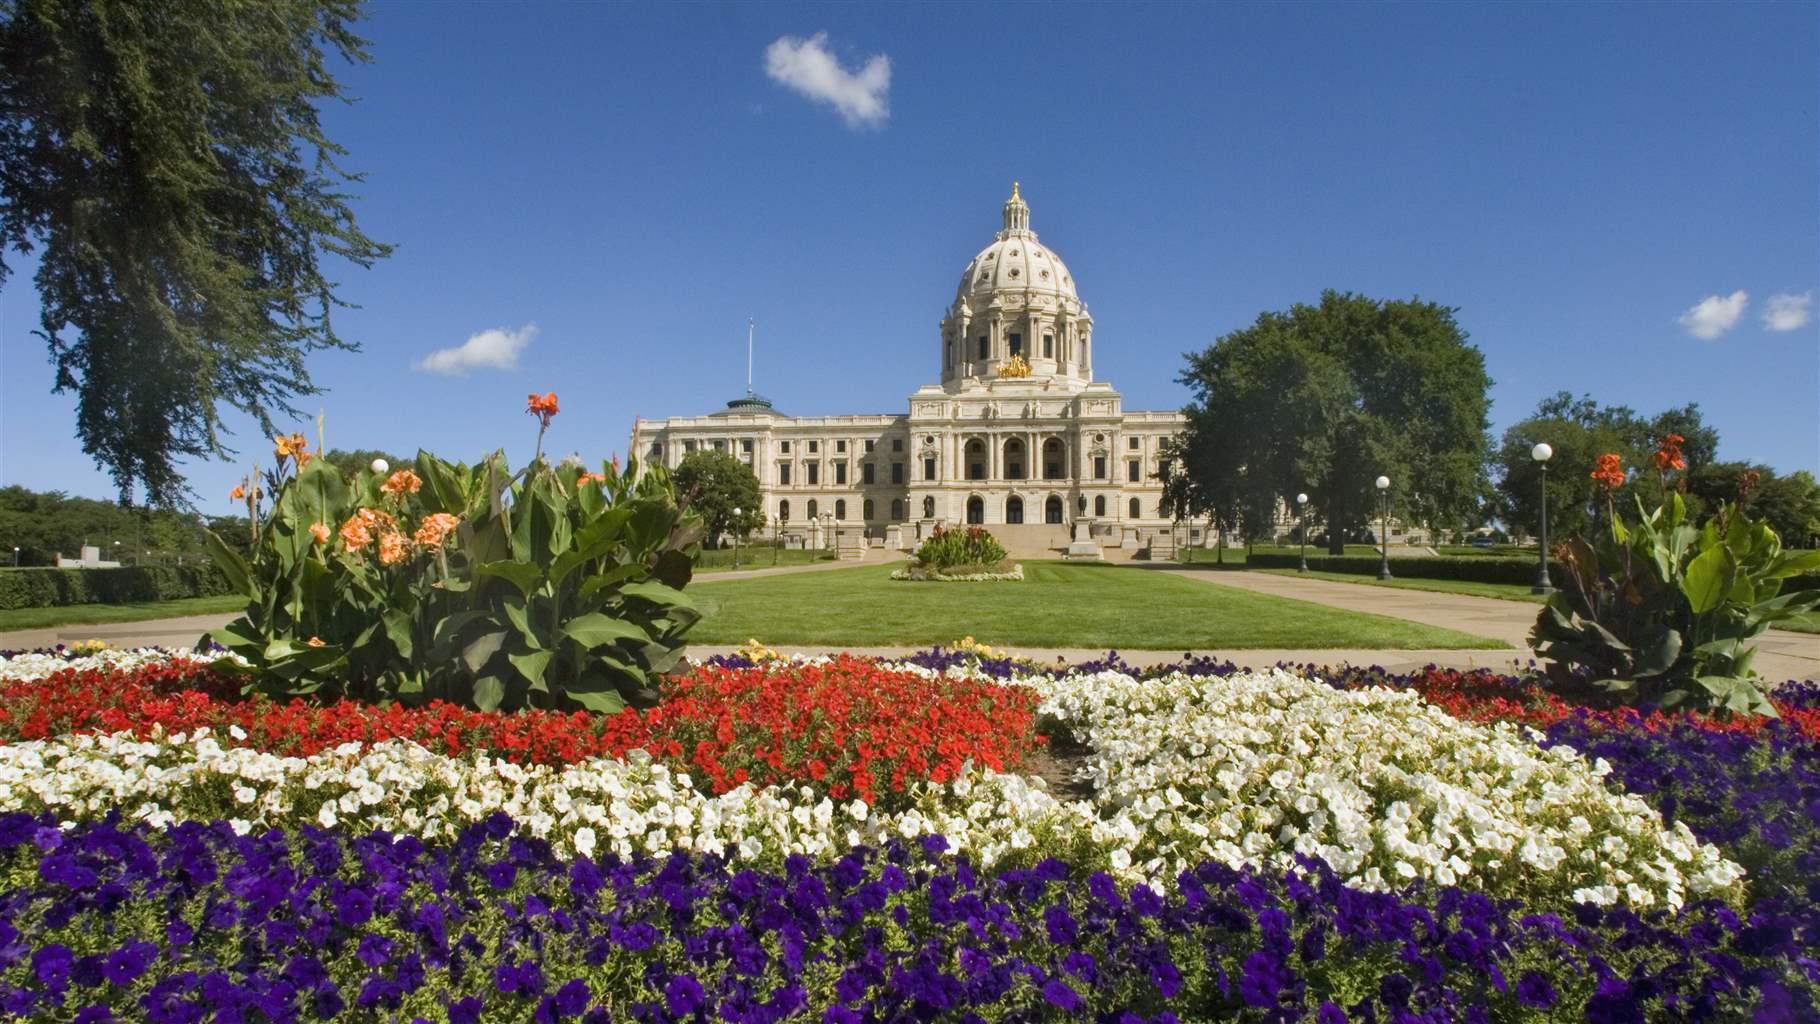 A blue sky with a few white puffy clouds sits over a flowerbed filled with red, white, and blue flowers in the foreground. In the background, a green lawn leads to a majestic off-white statehouse building that has a dome in the center.